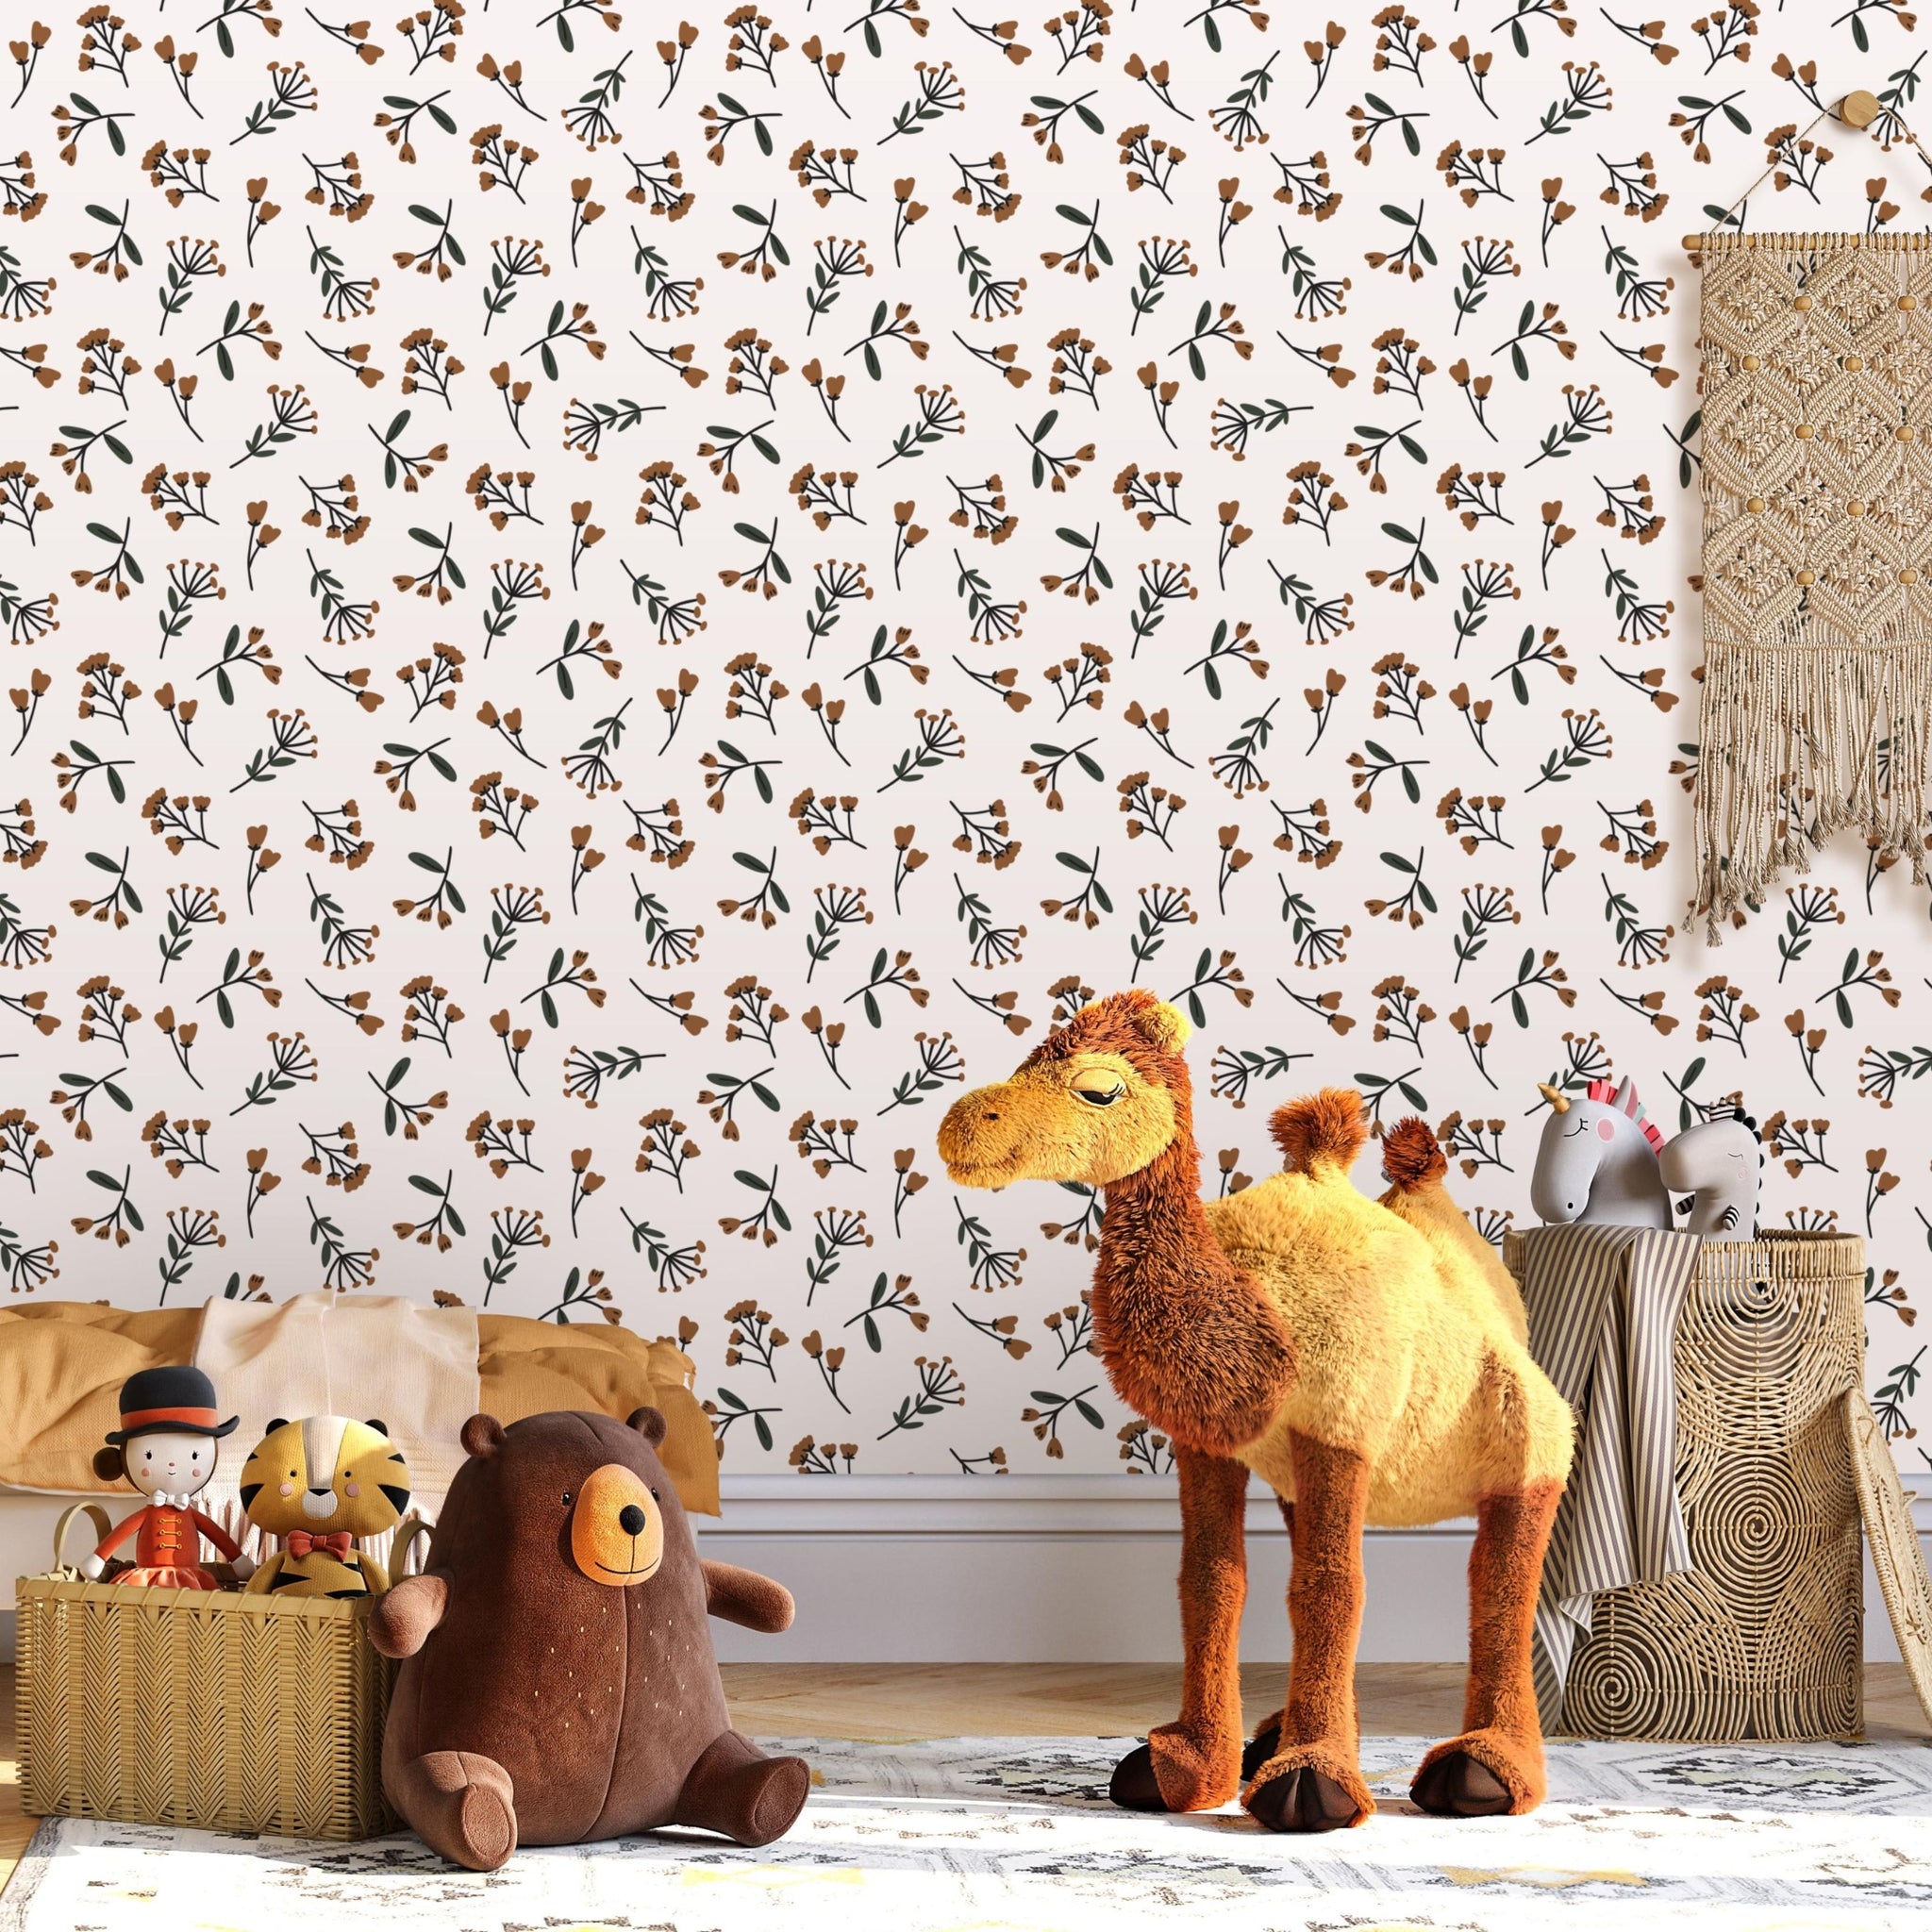 Peel & Stick Wallpaper for Kids & Nursery Rooms - Bulby Blossoms